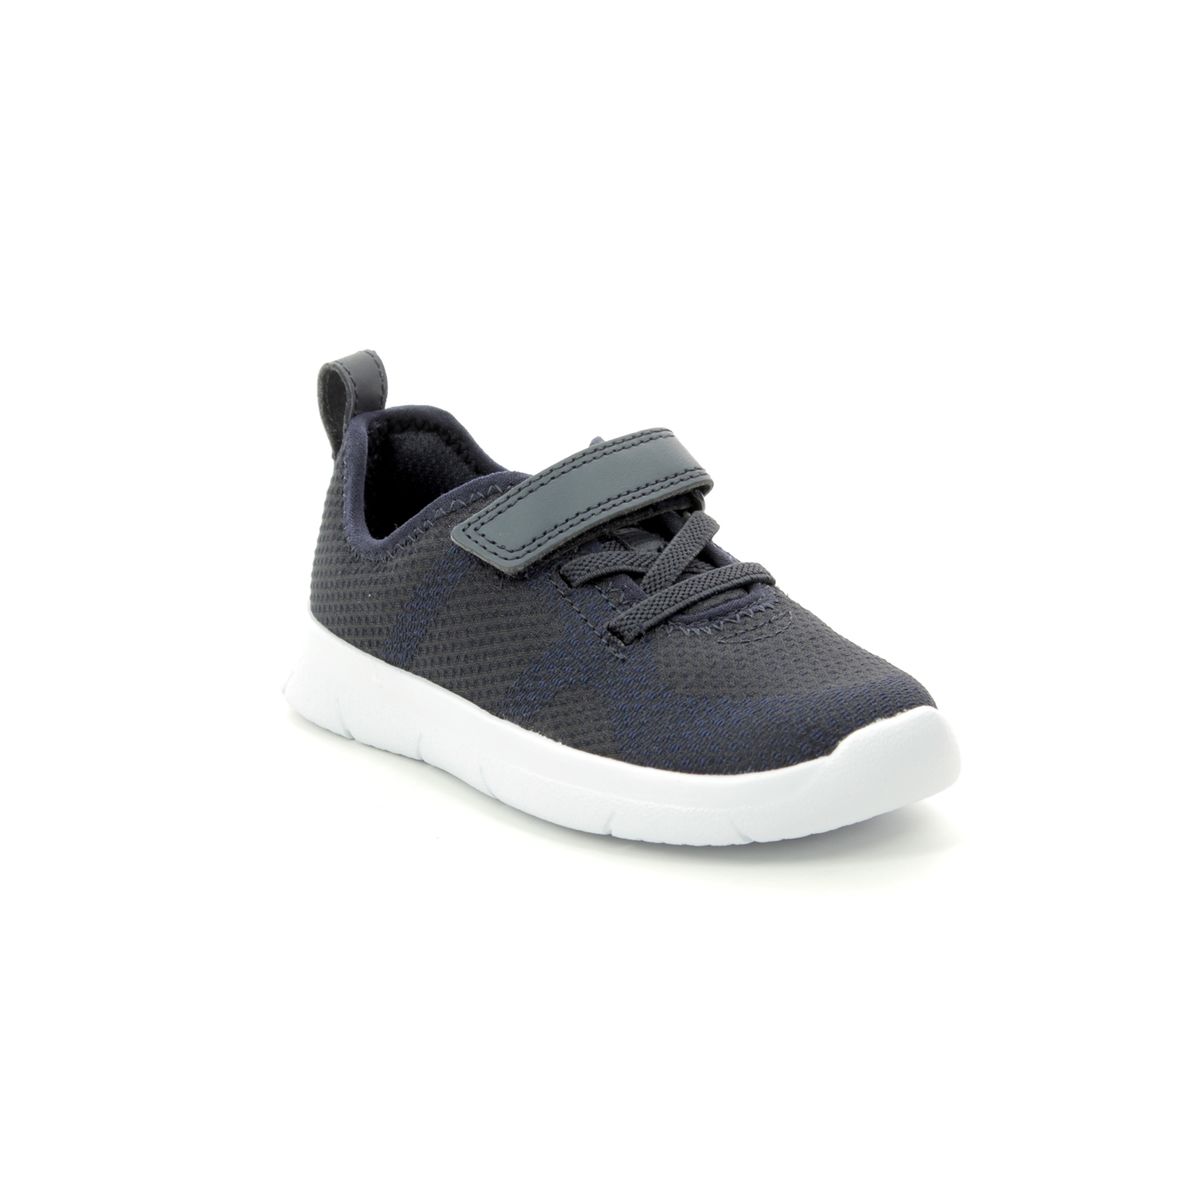 Clarks Ath Flux T Navy Kids Toddler Boys Trainers 412696F In Size 4.5 In Plain Navy F Width Fitting Regular Fit For kids